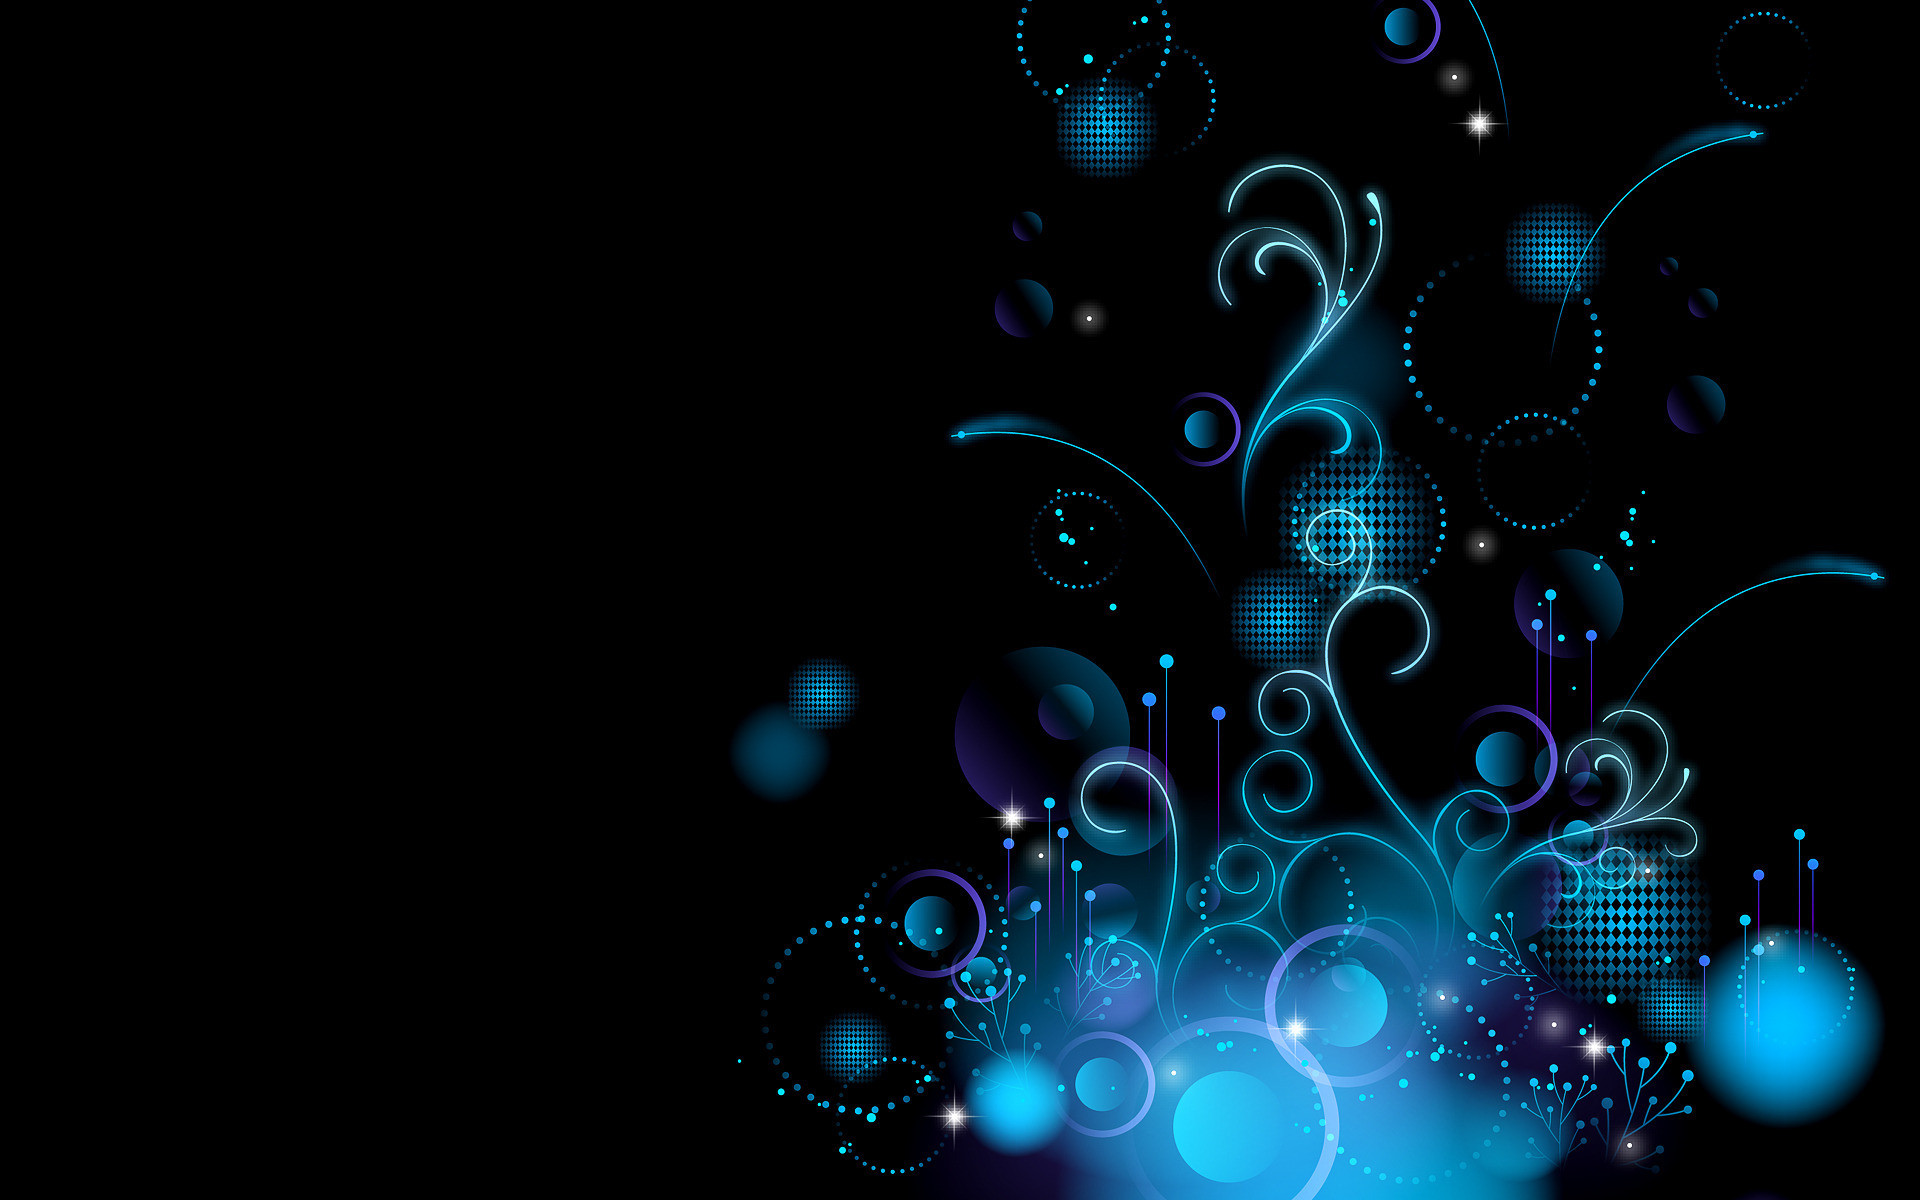 Blue And Black Backgrounds Wallpapers) – HD Wallpapers